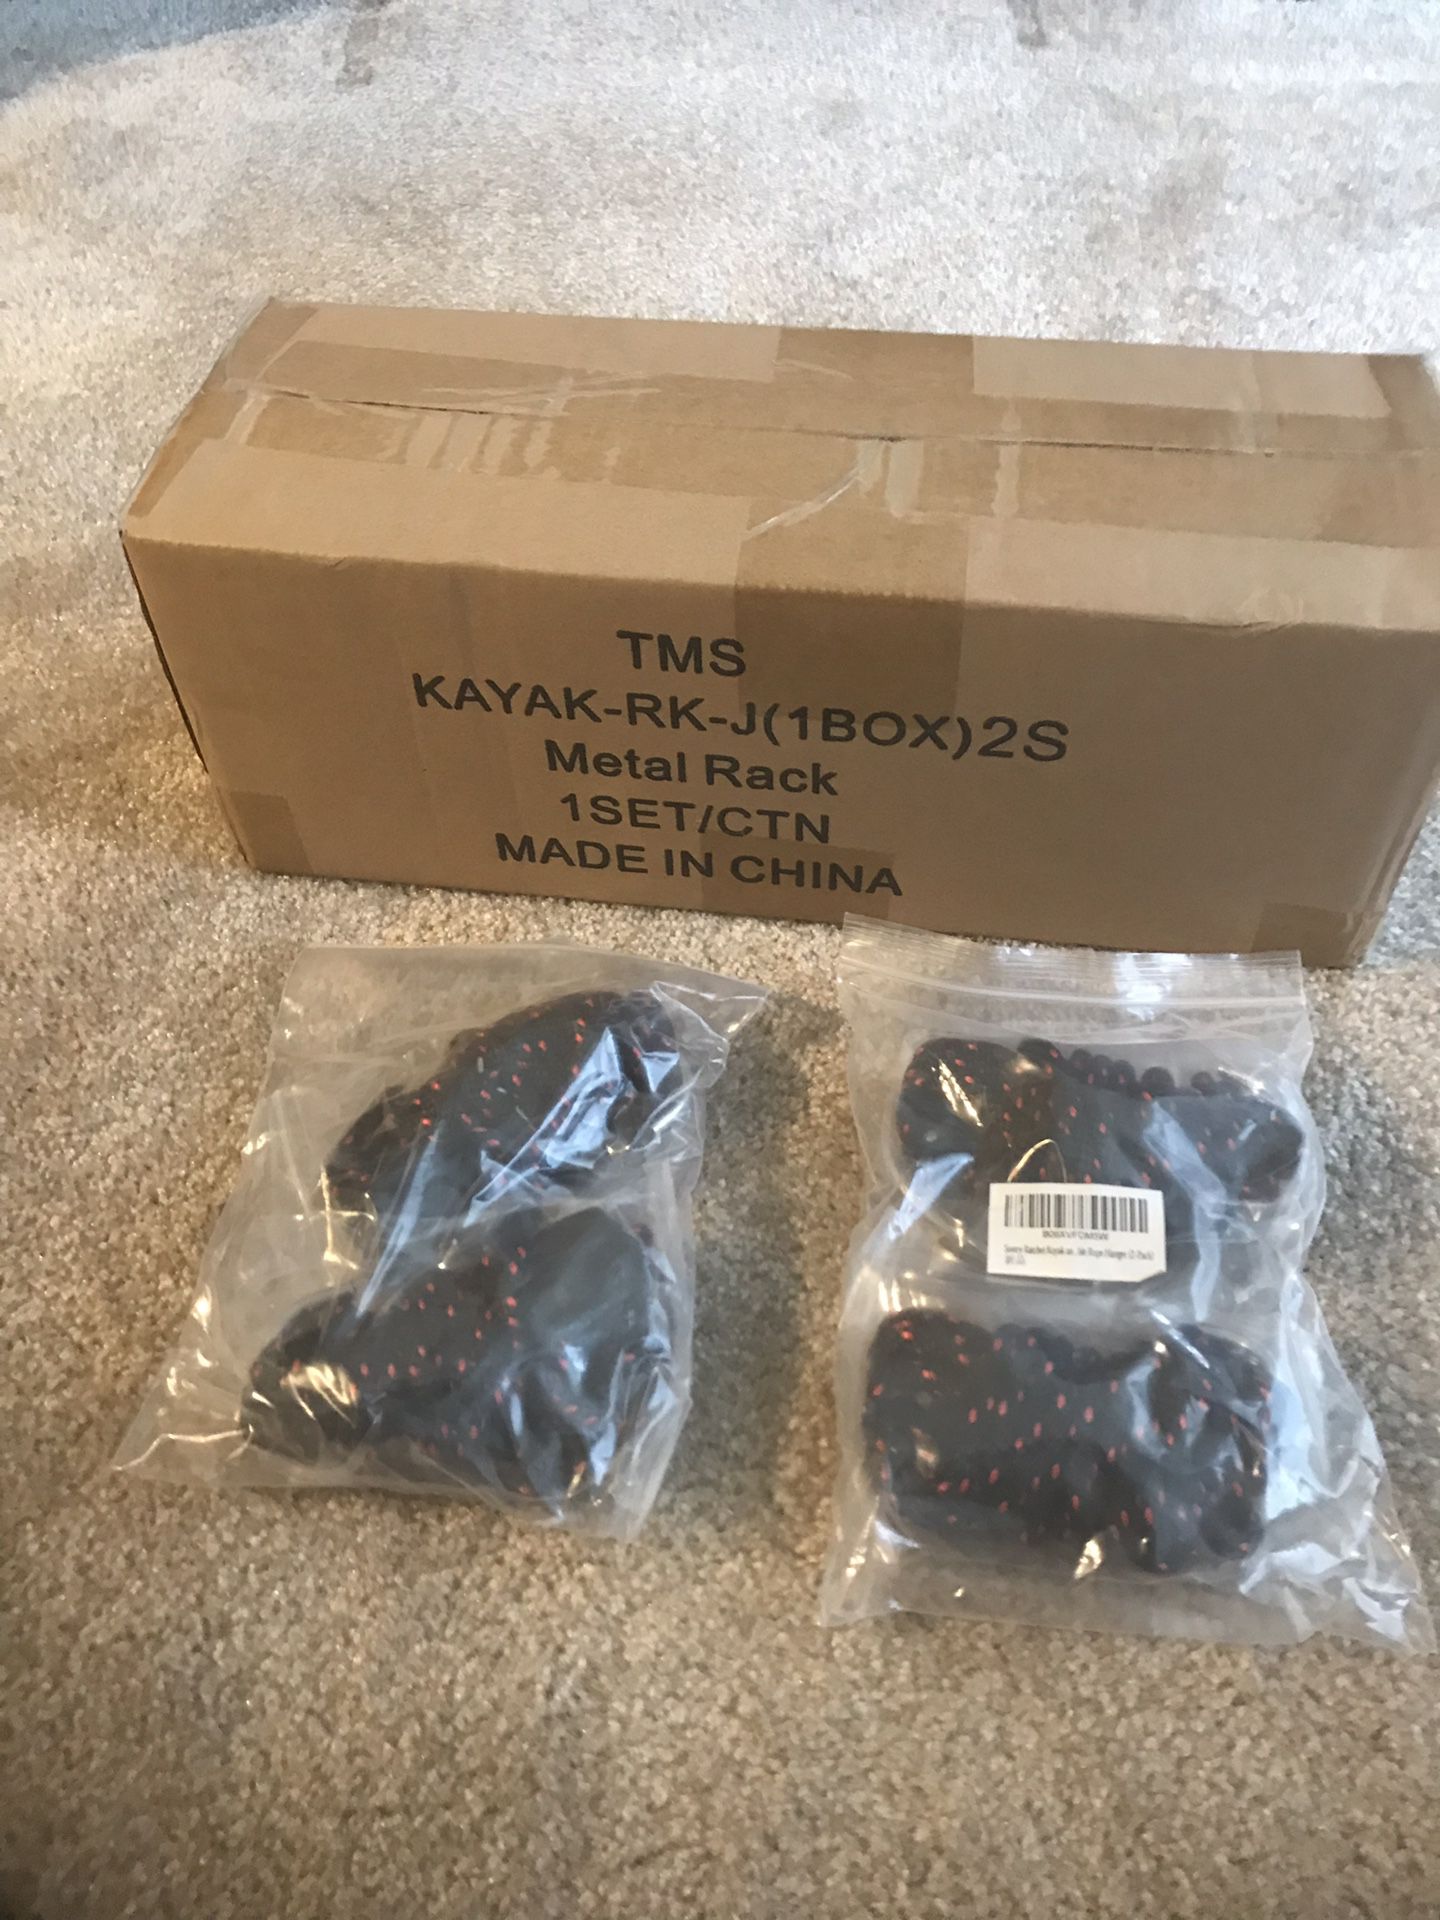 Kayak rack and rope/hooks that have not been unpackaged.